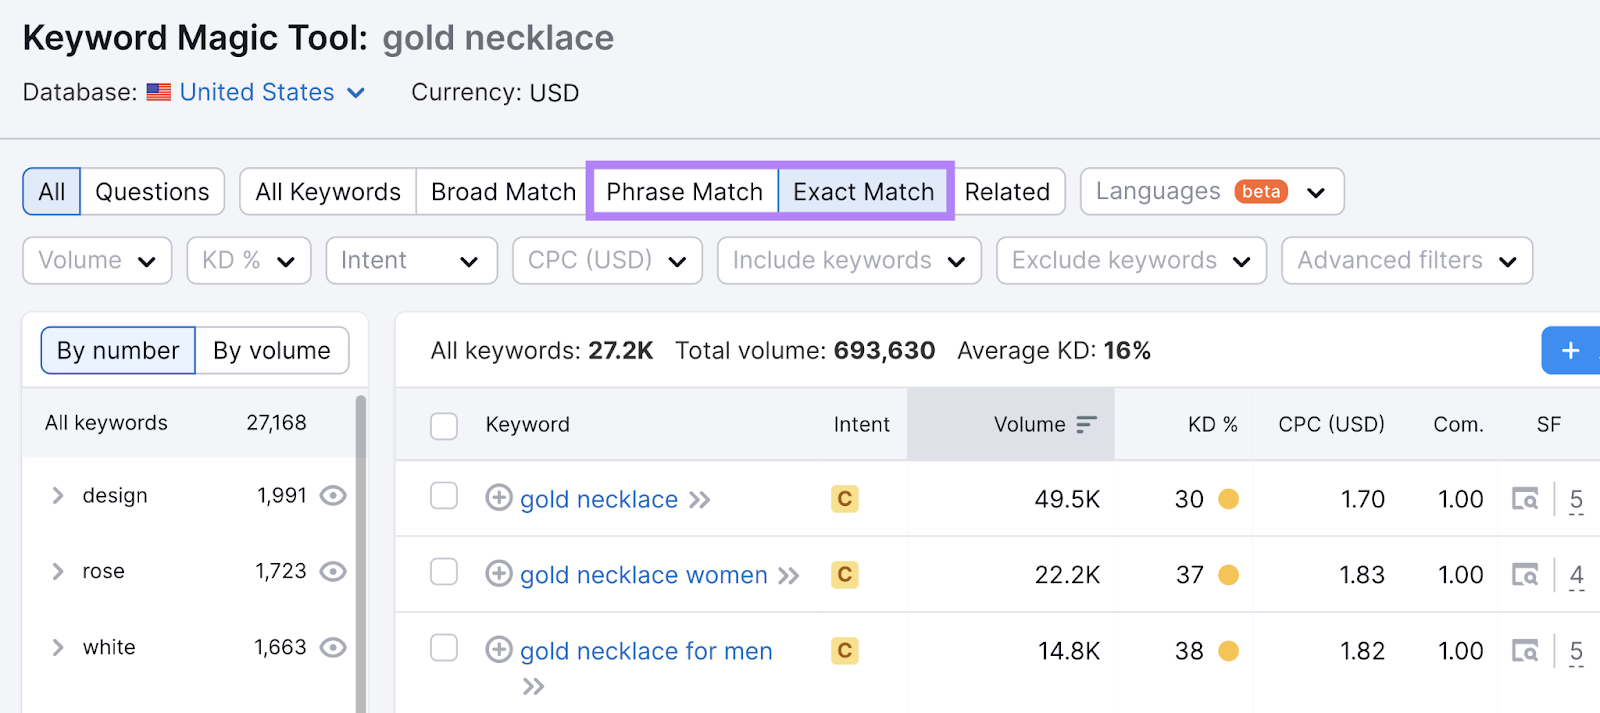 The "Phrase Match" and "Exact Match" buttons on the Keyword Magic Tool results page